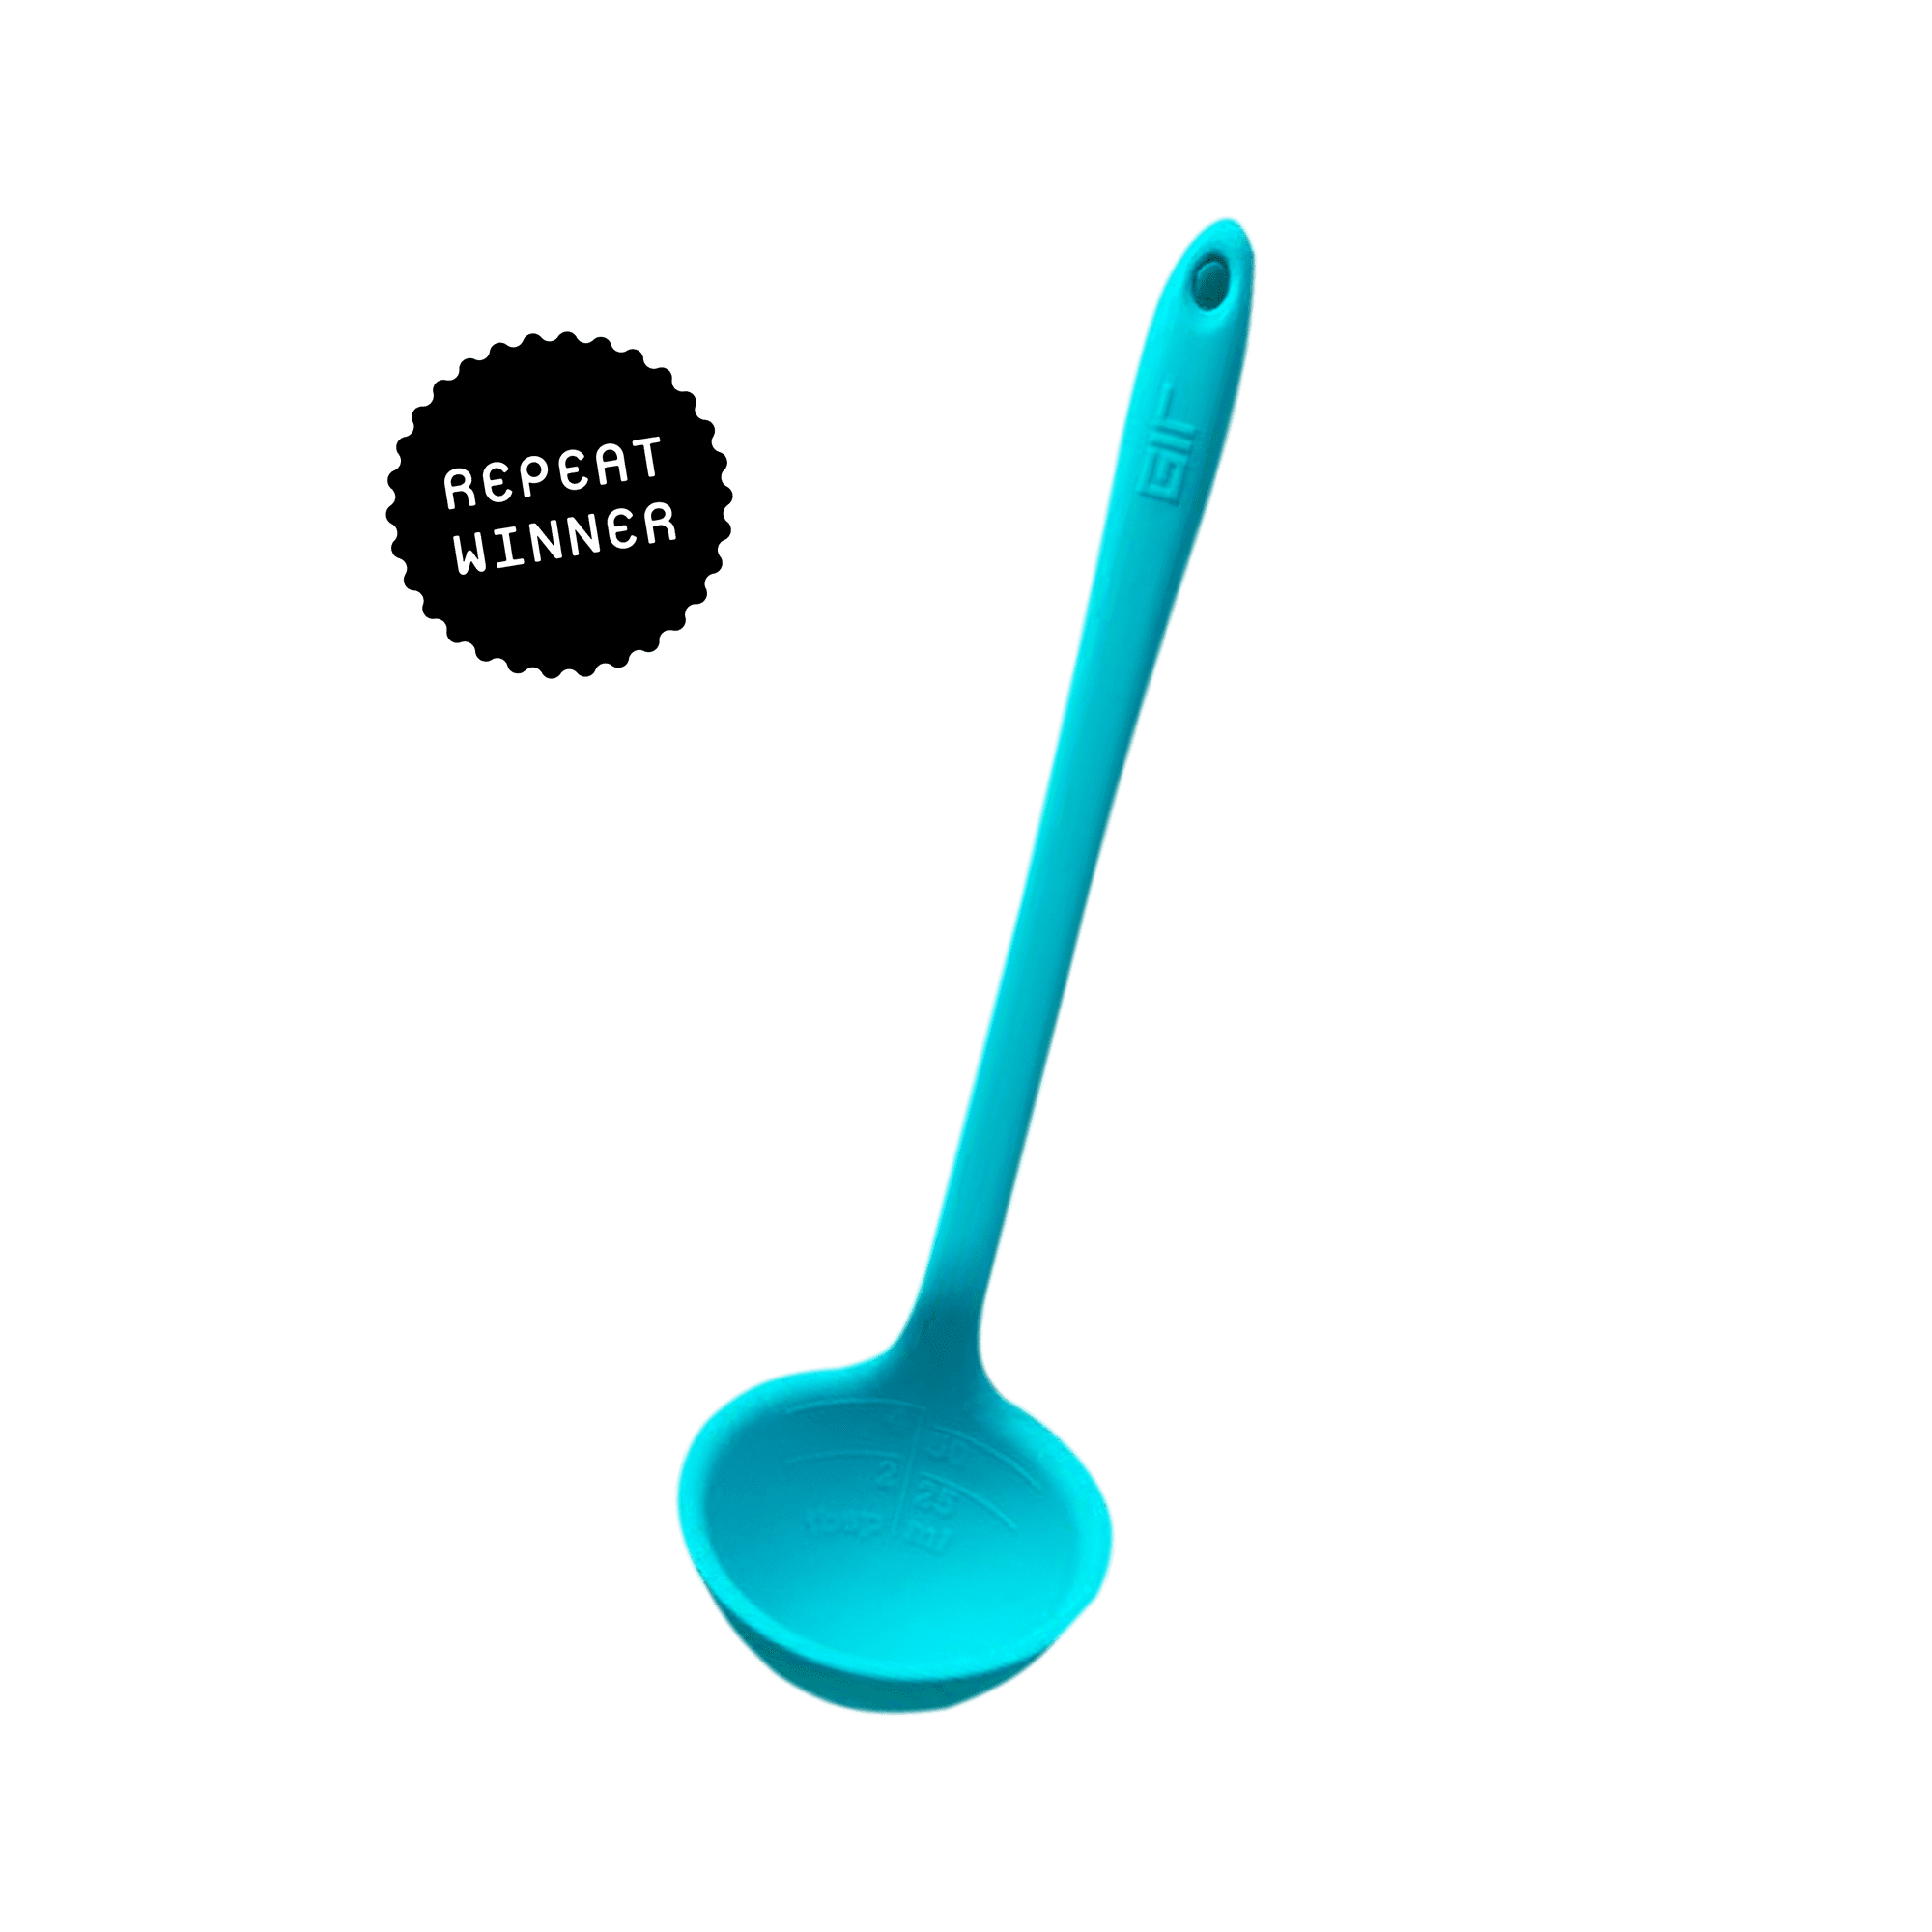 Measuring Cups Spoons Baking  Clad Measuring Cups Spoons - 11 Pcs White  Measuring - Aliexpress